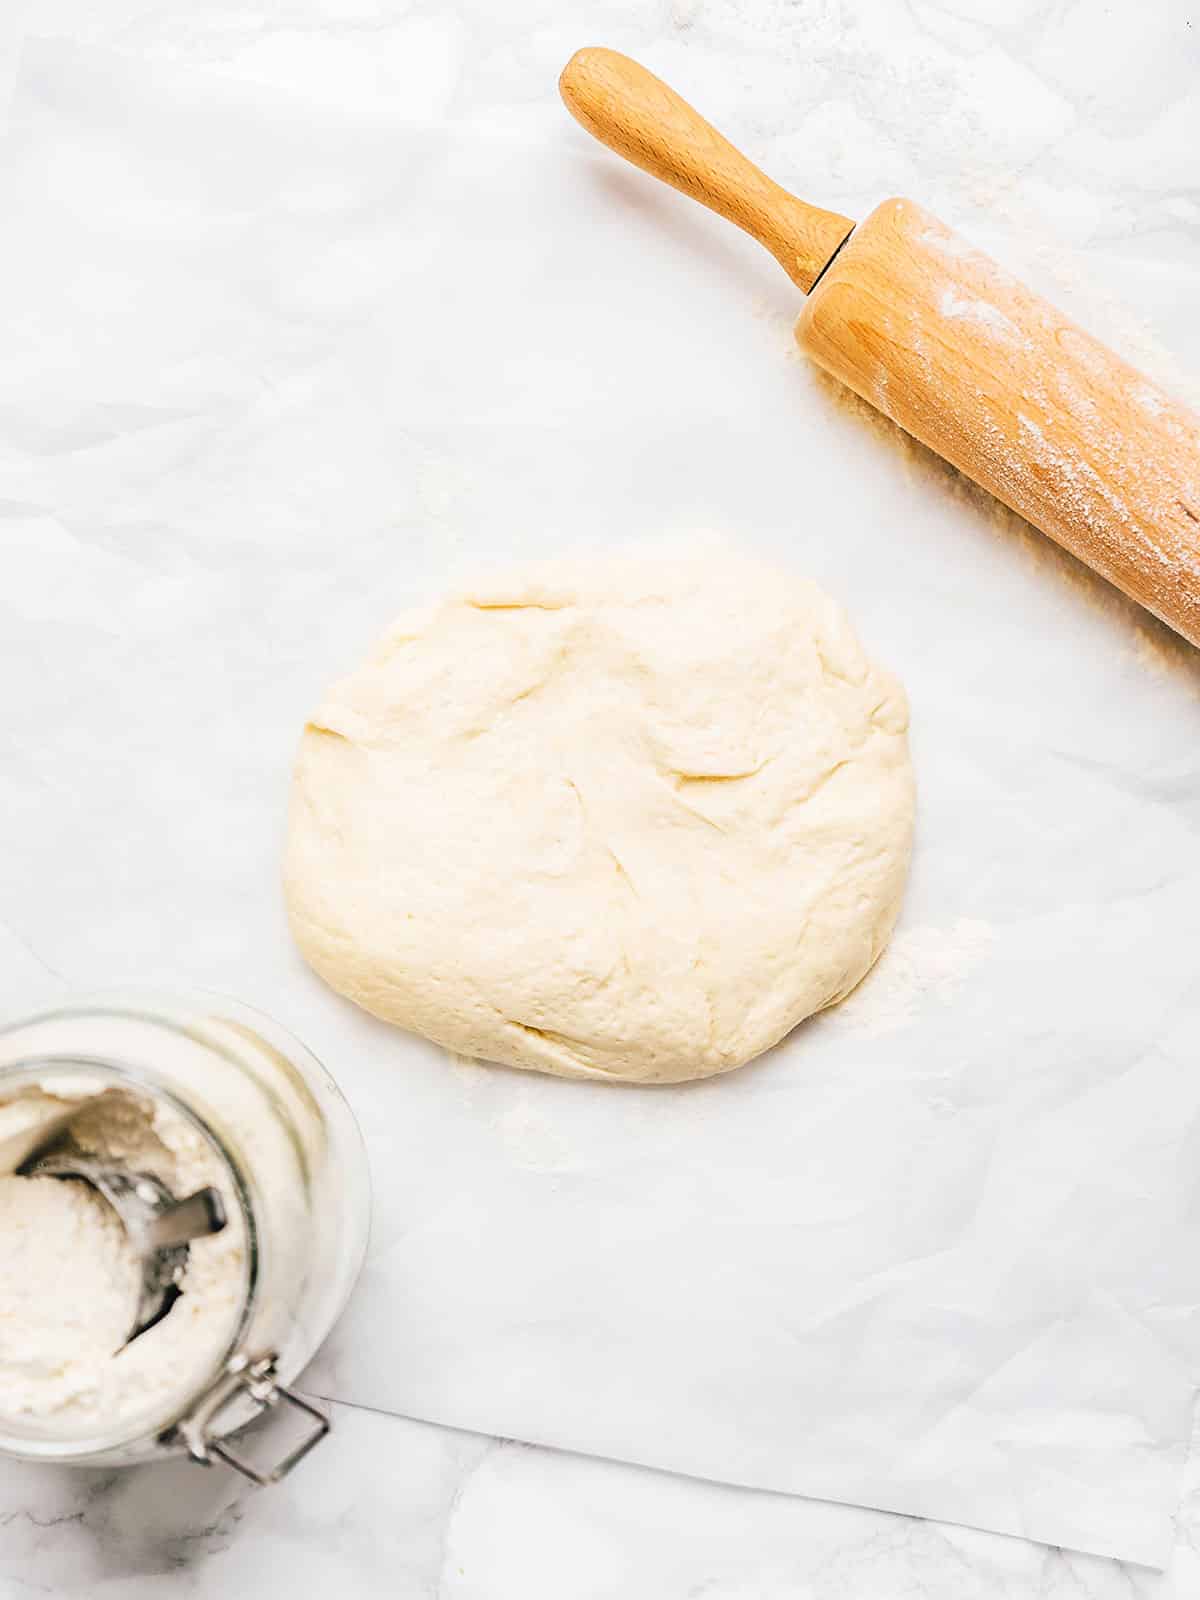 Pizza dough on a marble background.